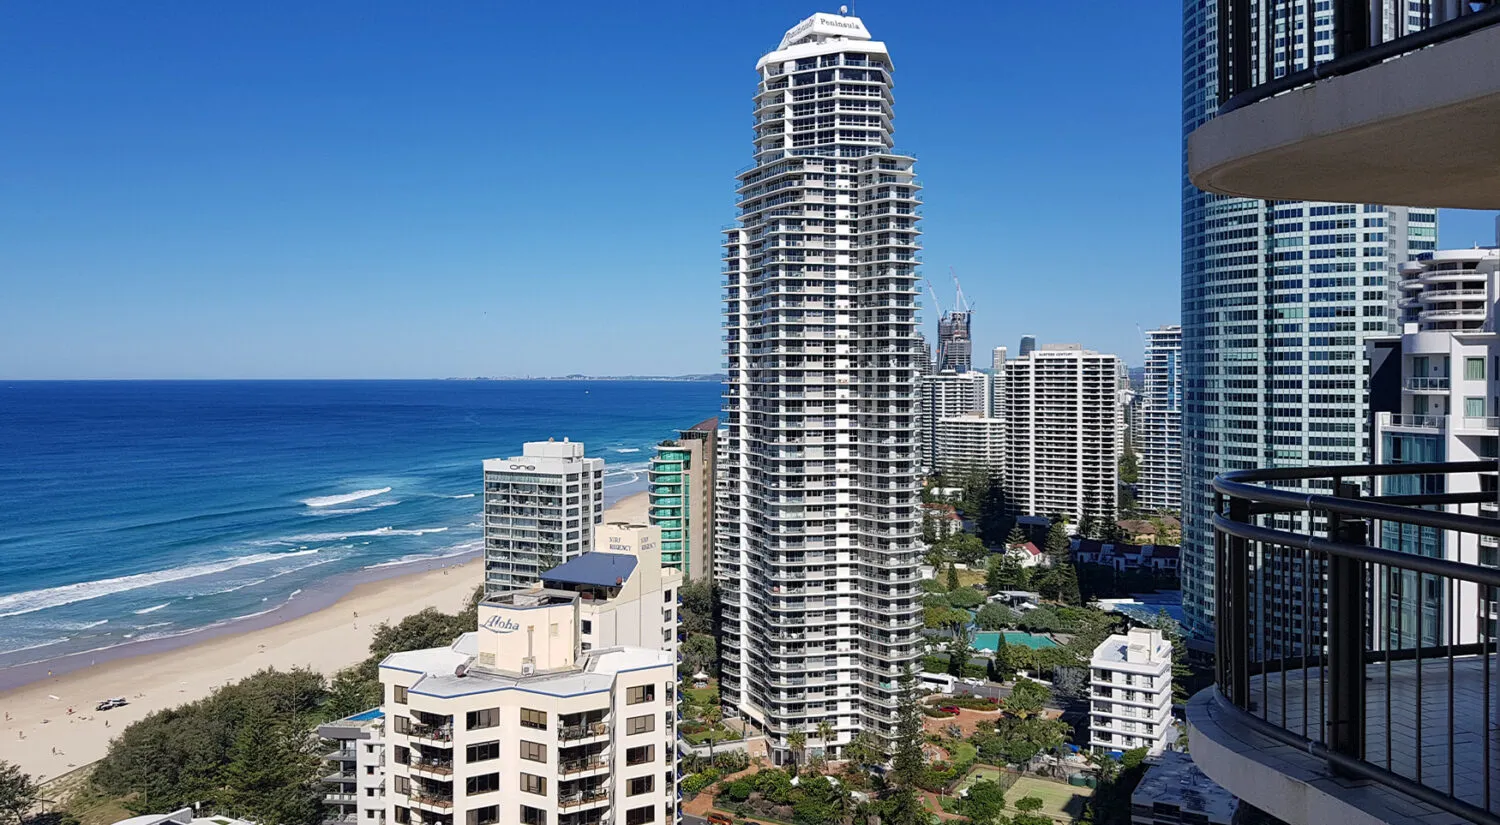 20 Things to Do in Surfers Paradise for a Guaranteed Good Time